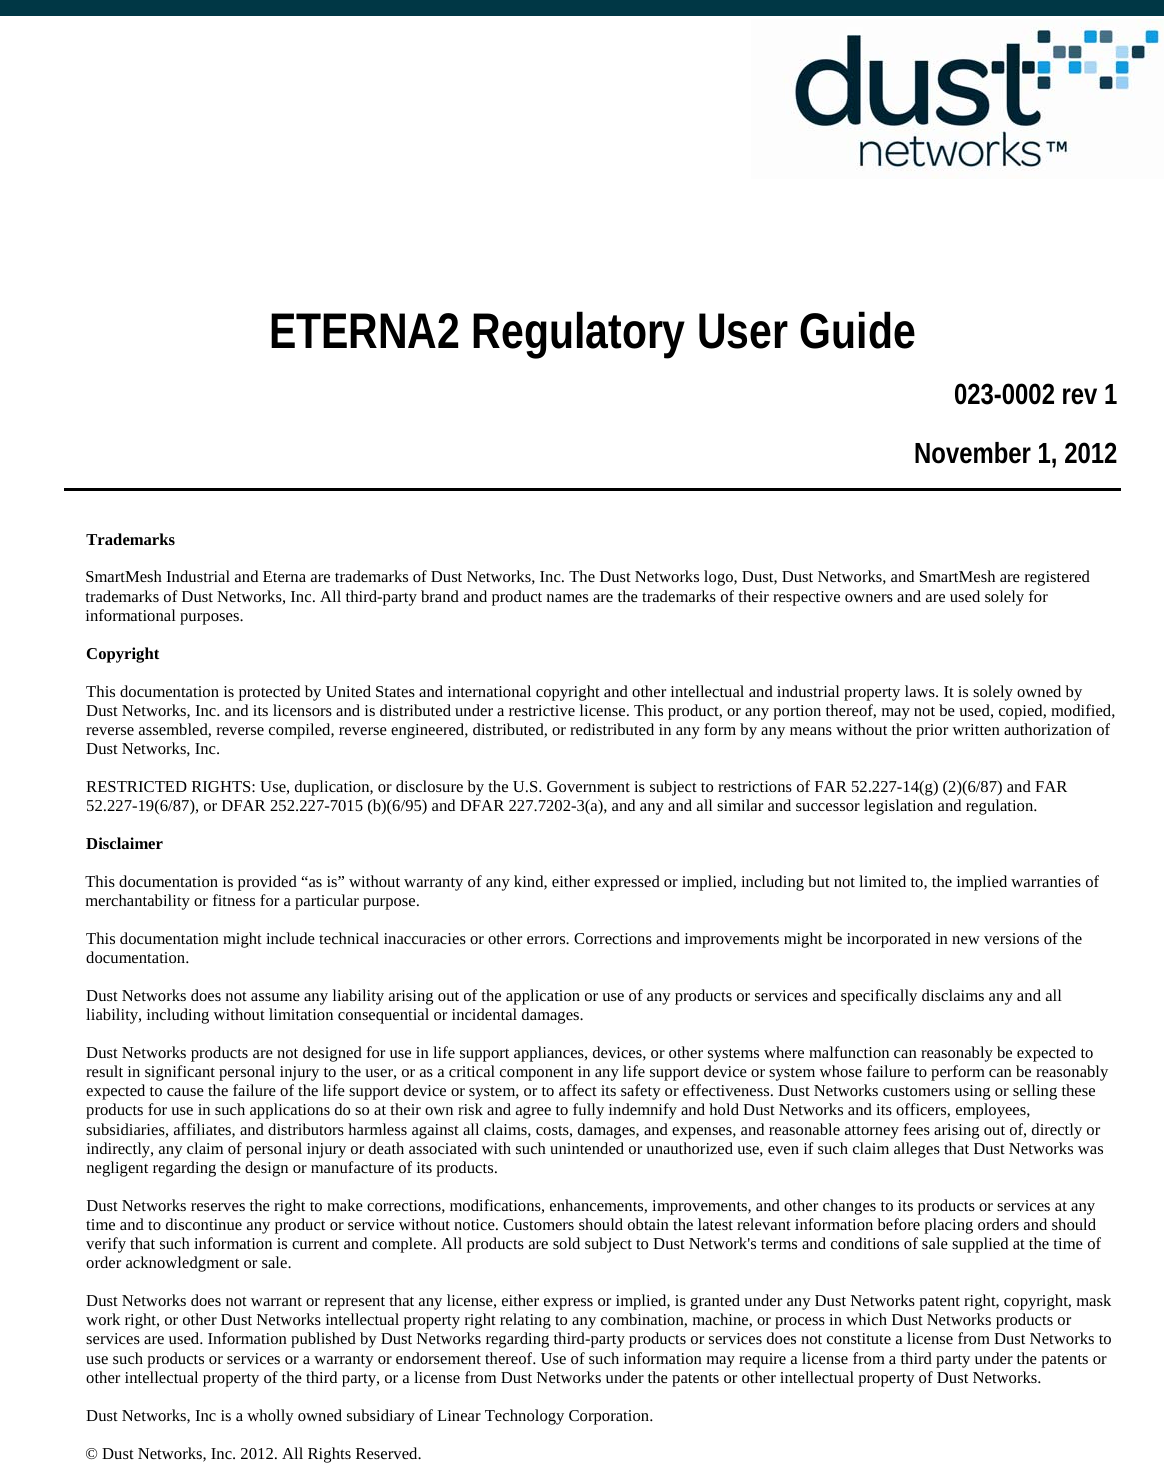        ETERNA2 Regulatory User Guide 023-0002 rev 1 November 1, 2012  Trademarks SmartMesh Industrial and Eterna are trademarks of Dust Networks, Inc. The Dust Networks logo, Dust, Dust Networks, and SmartMesh are registered trademarks of Dust Networks, Inc. All third-party brand and product names are the trademarks of their respective owners and are used solely for informational purposes. Copyright This documentation is protected by United States and international copyright and other intellectual and industrial property laws. It is solely owned by Dust Networks, Inc. and its licensors and is distributed under a restrictive license. This product, or any portion thereof, may not be used, copied, modified, reverse assembled, reverse compiled, reverse engineered, distributed, or redistributed in any form by any means without the prior written authorization of Dust Networks, Inc. RESTRICTED RIGHTS: Use, duplication, or disclosure by the U.S. Government is subject to restrictions of FAR 52.227-14(g) (2)(6/87) and FAR 52.227-19(6/87), or DFAR 252.227-7015 (b)(6/95) and DFAR 227.7202-3(a), and any and all similar and successor legislation and regulation. Disclaimer This documentation is provided “as is” without warranty of any kind, either expressed or implied, including but not limited to, the implied warranties of merchantability or fitness for a particular purpose. This documentation might include technical inaccuracies or other errors. Corrections and improvements might be incorporated in new versions of the documentation. Dust Networks does not assume any liability arising out of the application or use of any products or services and specifically disclaims any and all liability, including without limitation consequential or incidental damages. Dust Networks products are not designed for use in life support appliances, devices, or other systems where malfunction can reasonably be expected to result in significant personal injury to the user, or as a critical component in any life support device or system whose failure to perform can be reasonably expected to cause the failure of the life support device or system, or to affect its safety or effectiveness. Dust Networks customers using or selling these products for use in such applications do so at their own risk and agree to fully indemnify and hold Dust Networks and its officers, employees, subsidiaries, affiliates, and distributors harmless against all claims, costs, damages, and expenses, and reasonable attorney fees arising out of, directly or indirectly, any claim of personal injury or death associated with such unintended or unauthorized use, even if such claim alleges that Dust Networks was negligent regarding the design or manufacture of its products. Dust Networks reserves the right to make corrections, modifications, enhancements, improvements, and other changes to its products or services at any time and to discontinue any product or service without notice. Customers should obtain the latest relevant information before placing orders and should verify that such information is current and complete. All products are sold subject to Dust Network&apos;s terms and conditions of sale supplied at the time of order acknowledgment or sale. Dust Networks does not warrant or represent that any license, either express or implied, is granted under any Dust Networks patent right, copyright, mask work right, or other Dust Networks intellectual property right relating to any combination, machine, or process in which Dust Networks products or services are used. Information published by Dust Networks regarding third-party products or services does not constitute a license from Dust Networks to use such products or services or a warranty or endorsement thereof. Use of such information may require a license from a third party under the patents or other intellectual property of the third party, or a license from Dust Networks under the patents or other intellectual property of Dust Networks.  Dust Networks, Inc is a wholly owned subsidiary of Linear Technology Corporation. © Dust Networks, Inc. 2012. All Rights Reserved.   